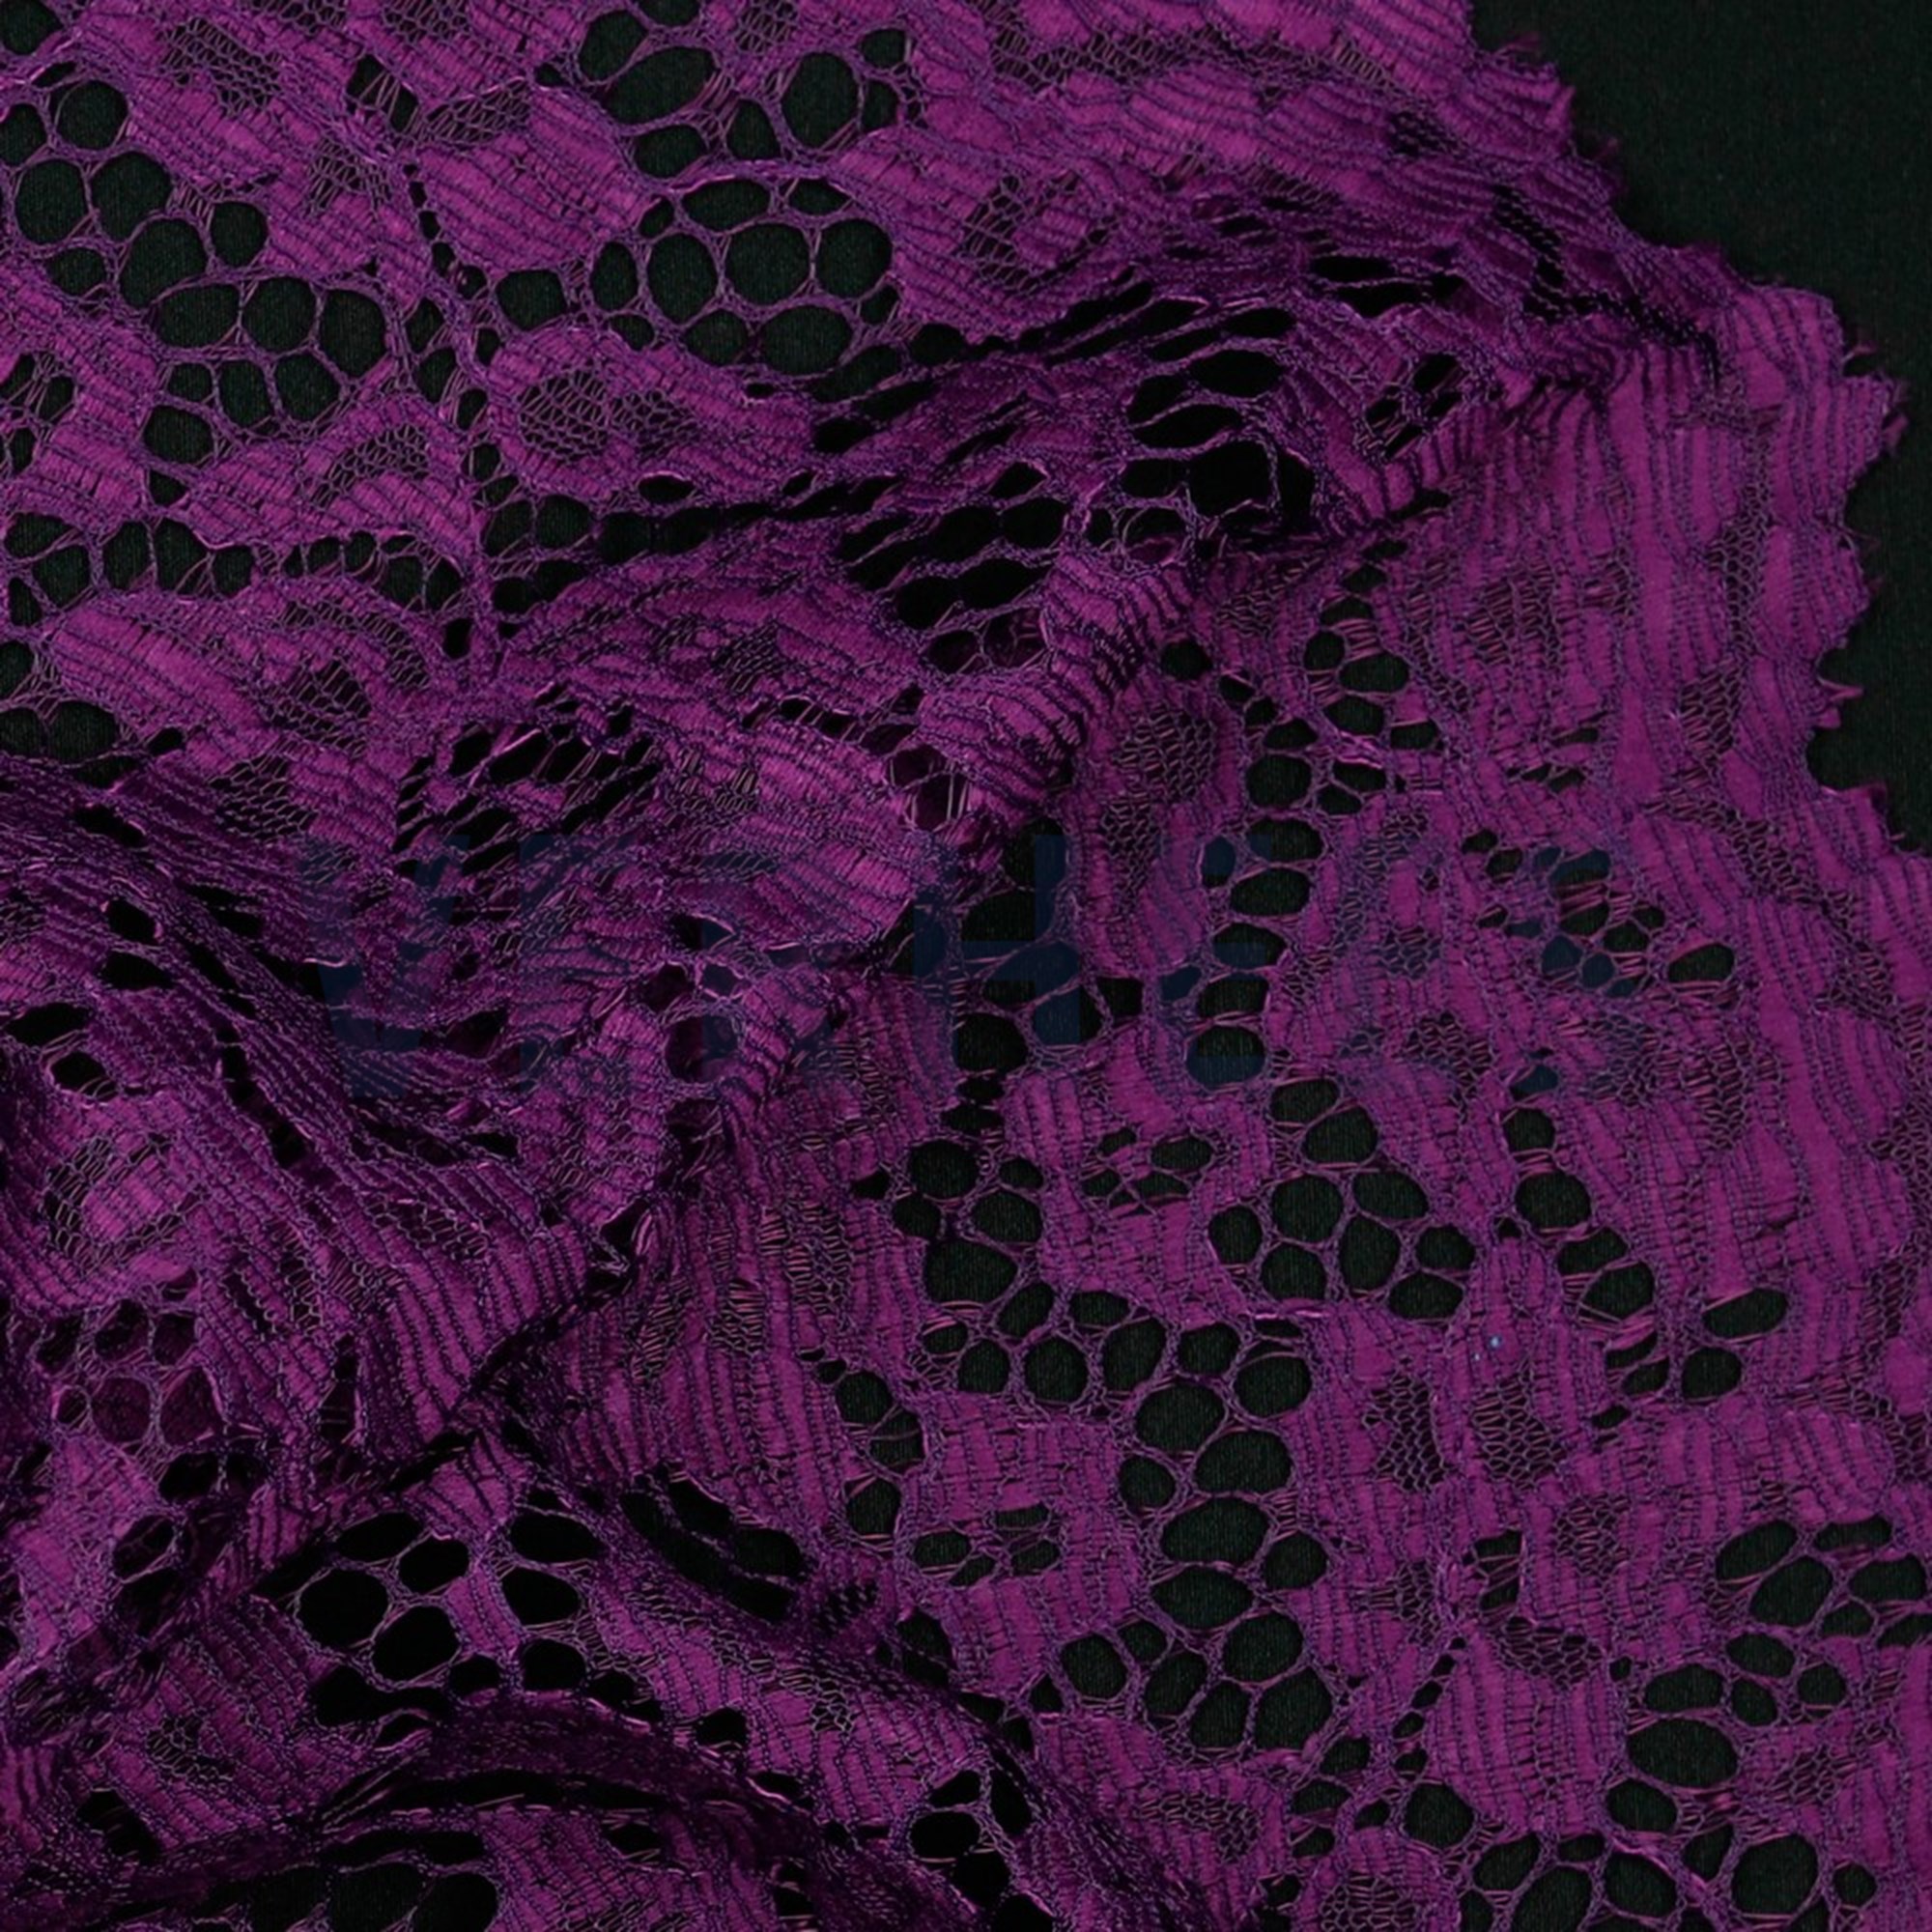 LACE BORDER 2 SIDES PURPLE (high resolution) #3